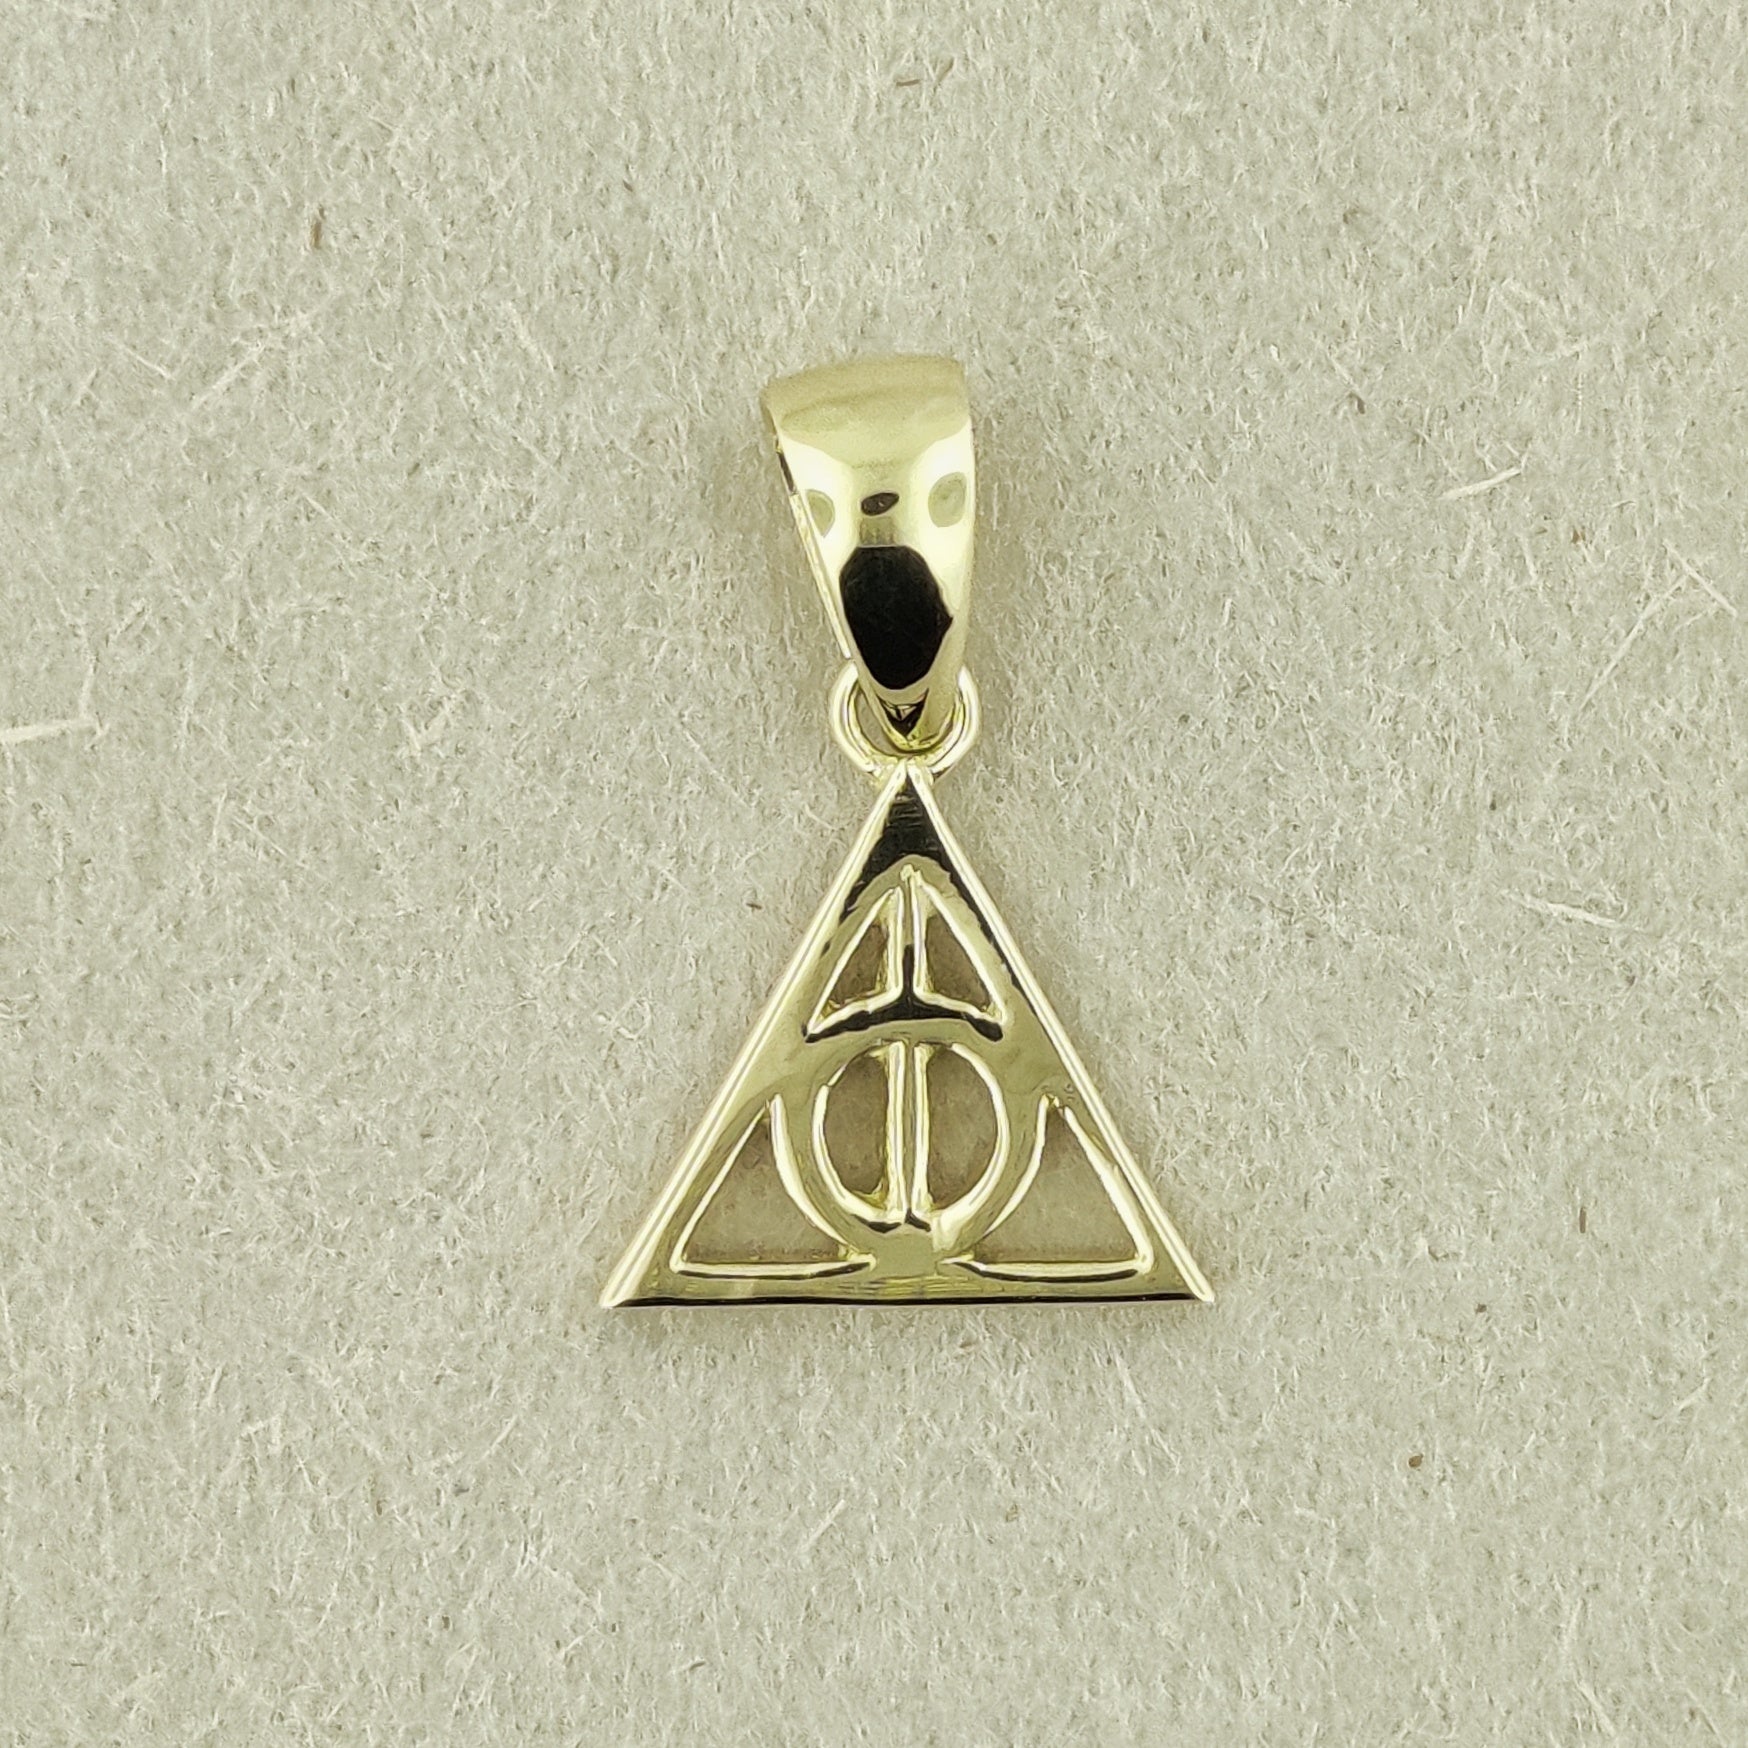 Gold Deathly Wizard Charm Pendant, Gold Wizard Charm, Gold Wizard Pendant, Precious Metal Geekery, Precious Metal Geek Jewelry, Precious Metal Geek Jewellery, Gold Wizard Pendant, Gold Geek Jewellery, Gold Geek Jewelry, Geeky Gift For Her, Gold Cosplay Jewellery, Gold Cosplay Jewelry, Gold Deathly Hallows Pendant